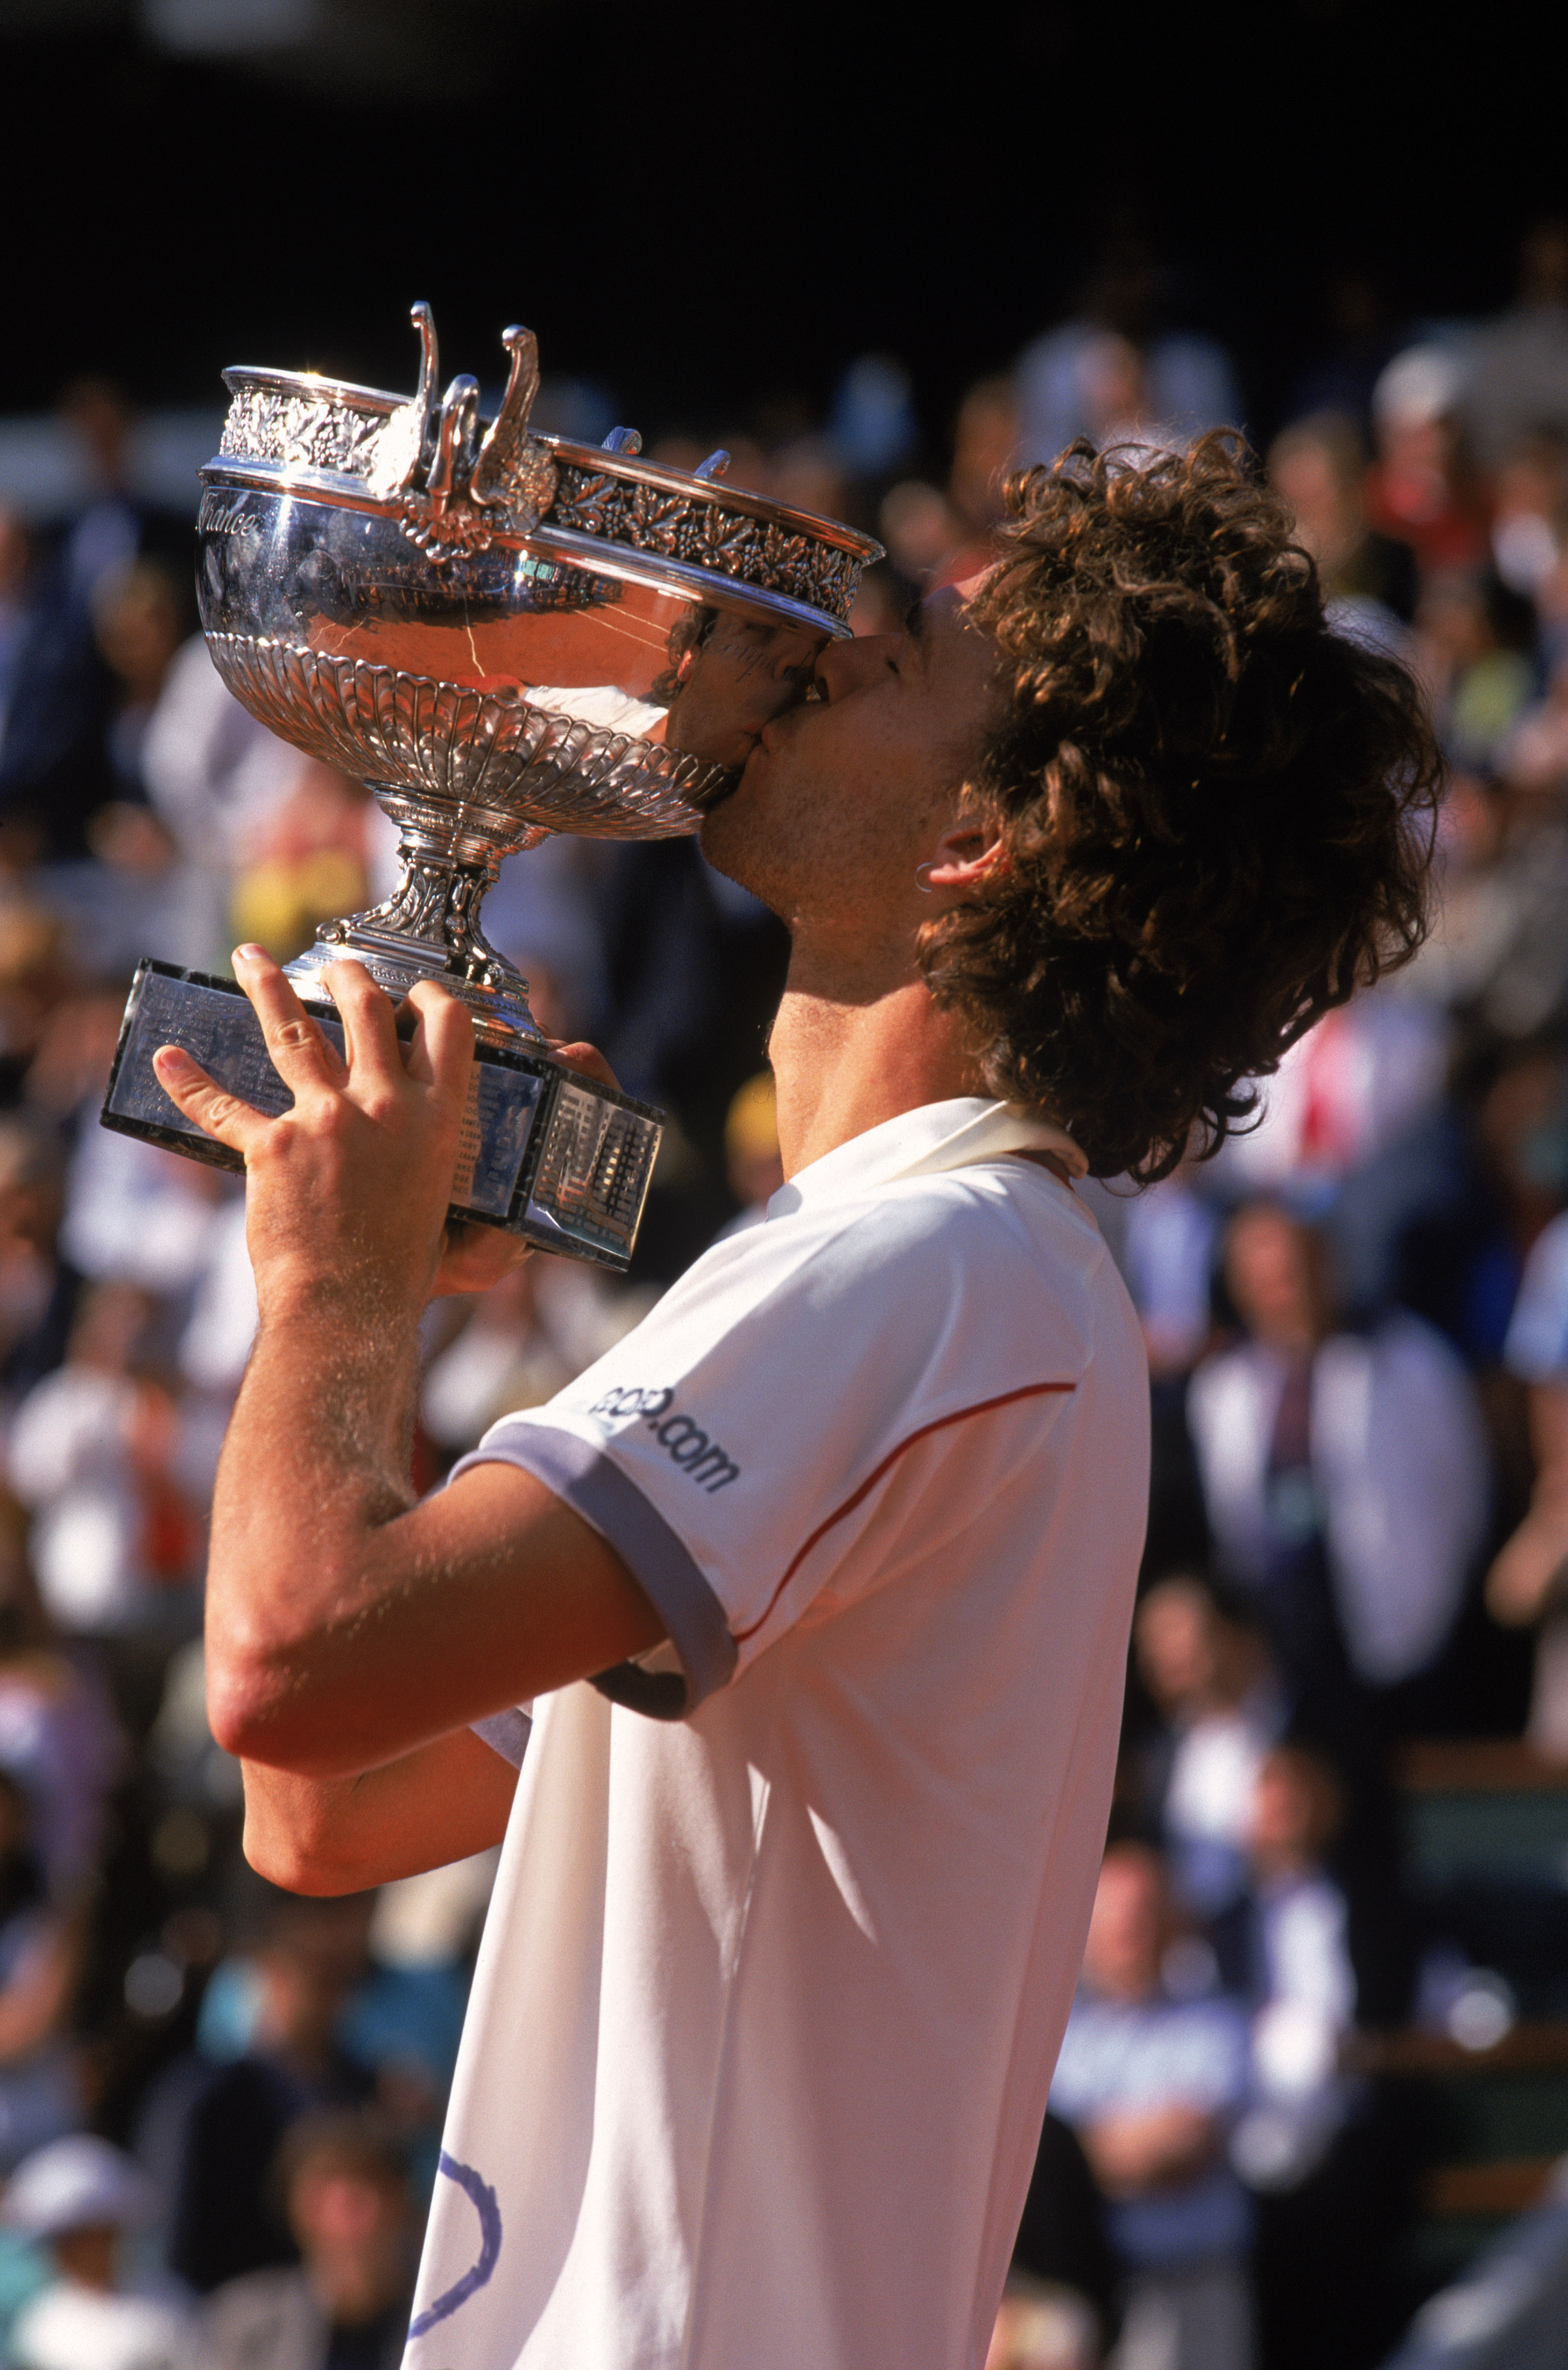 The AllTime Greatest Men's French Open Champions News, Scores